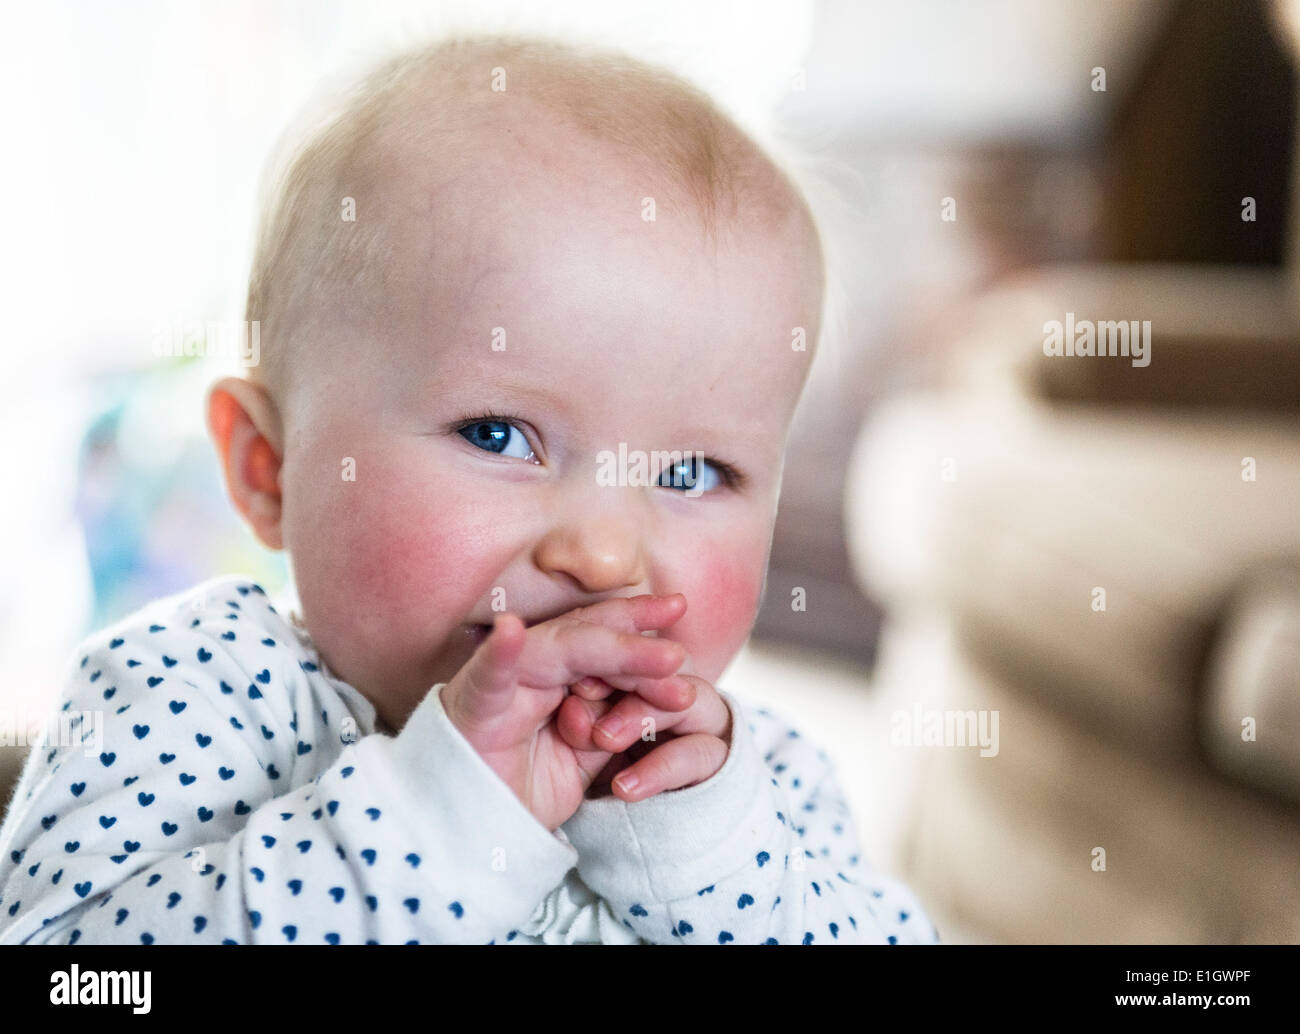 A 7 month old baby girl giggling. Stock Photo